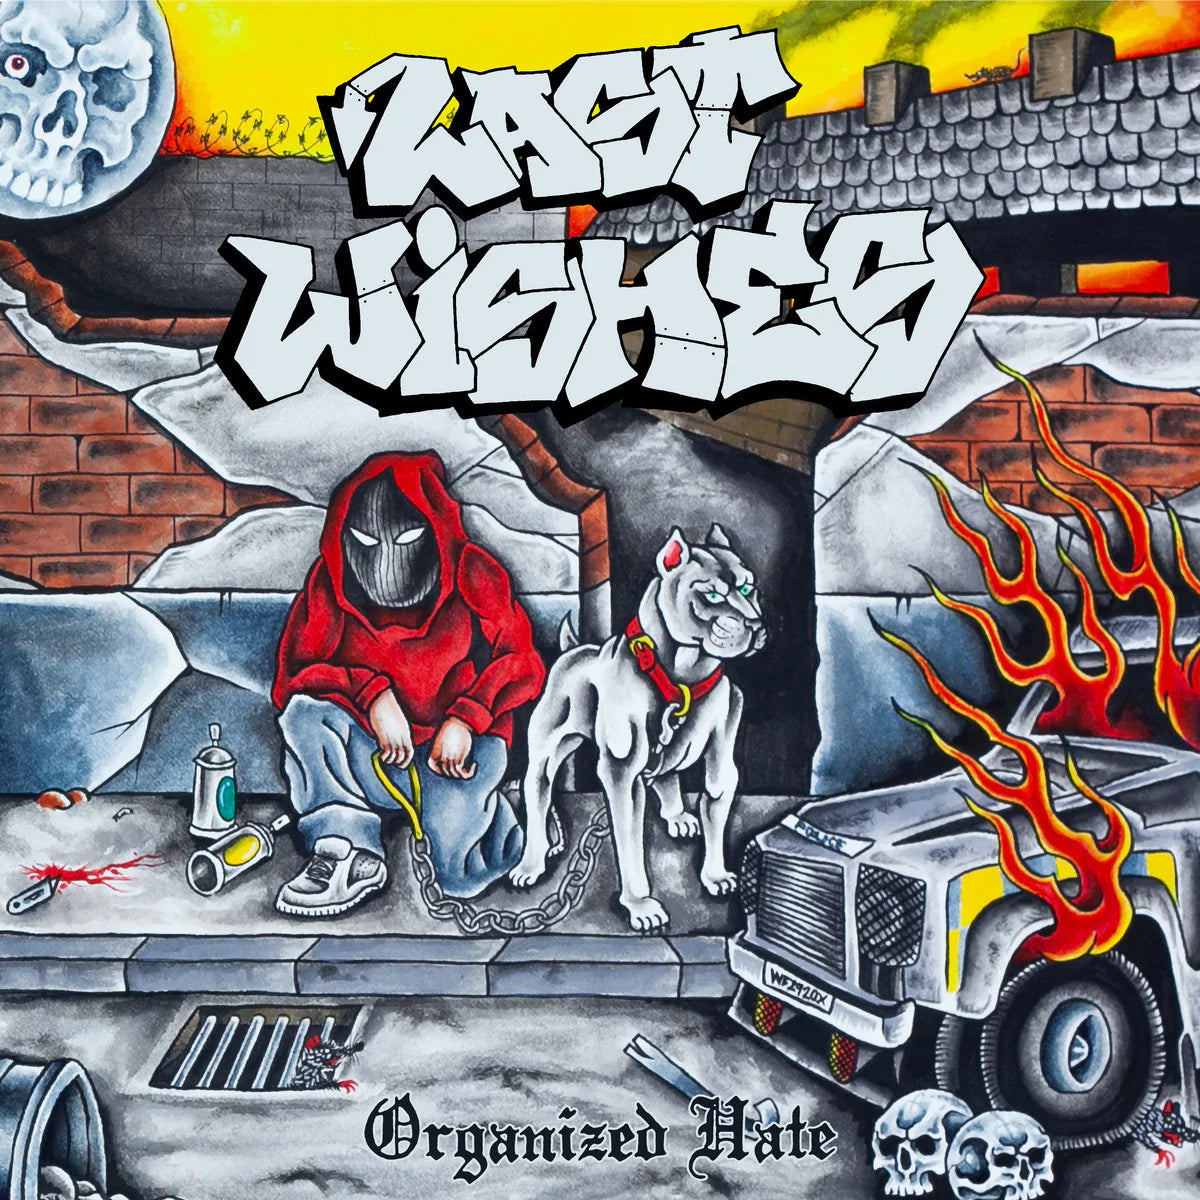 Last Wishes "Organized Hate" CD